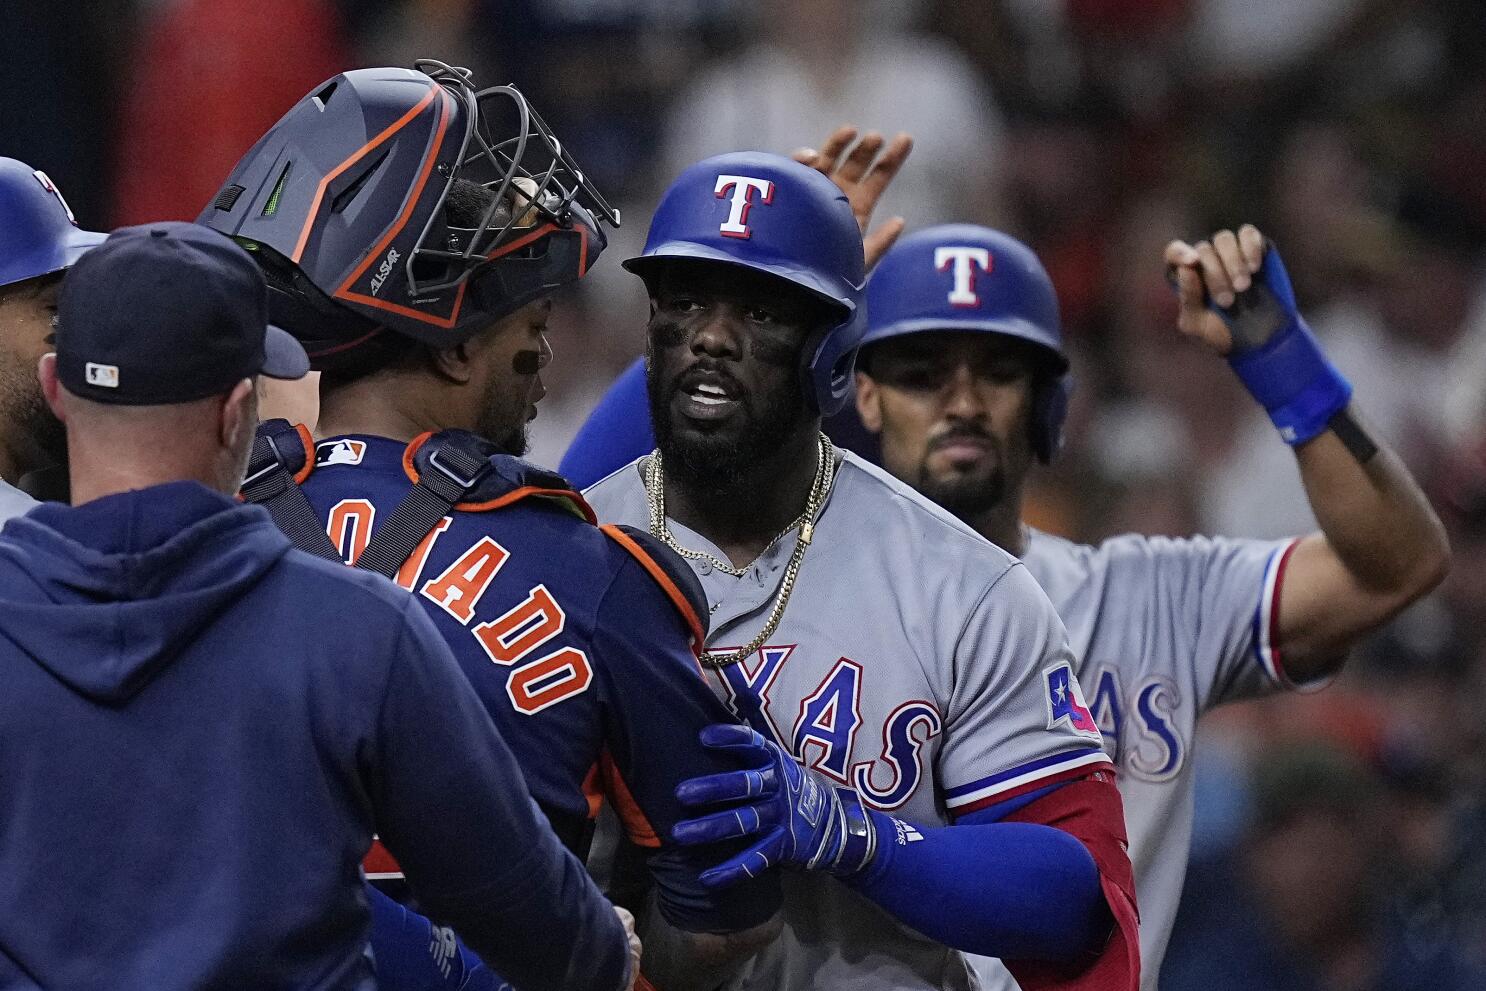 Astros meet Rangers while Phillies face Arizona in MLB playoffs